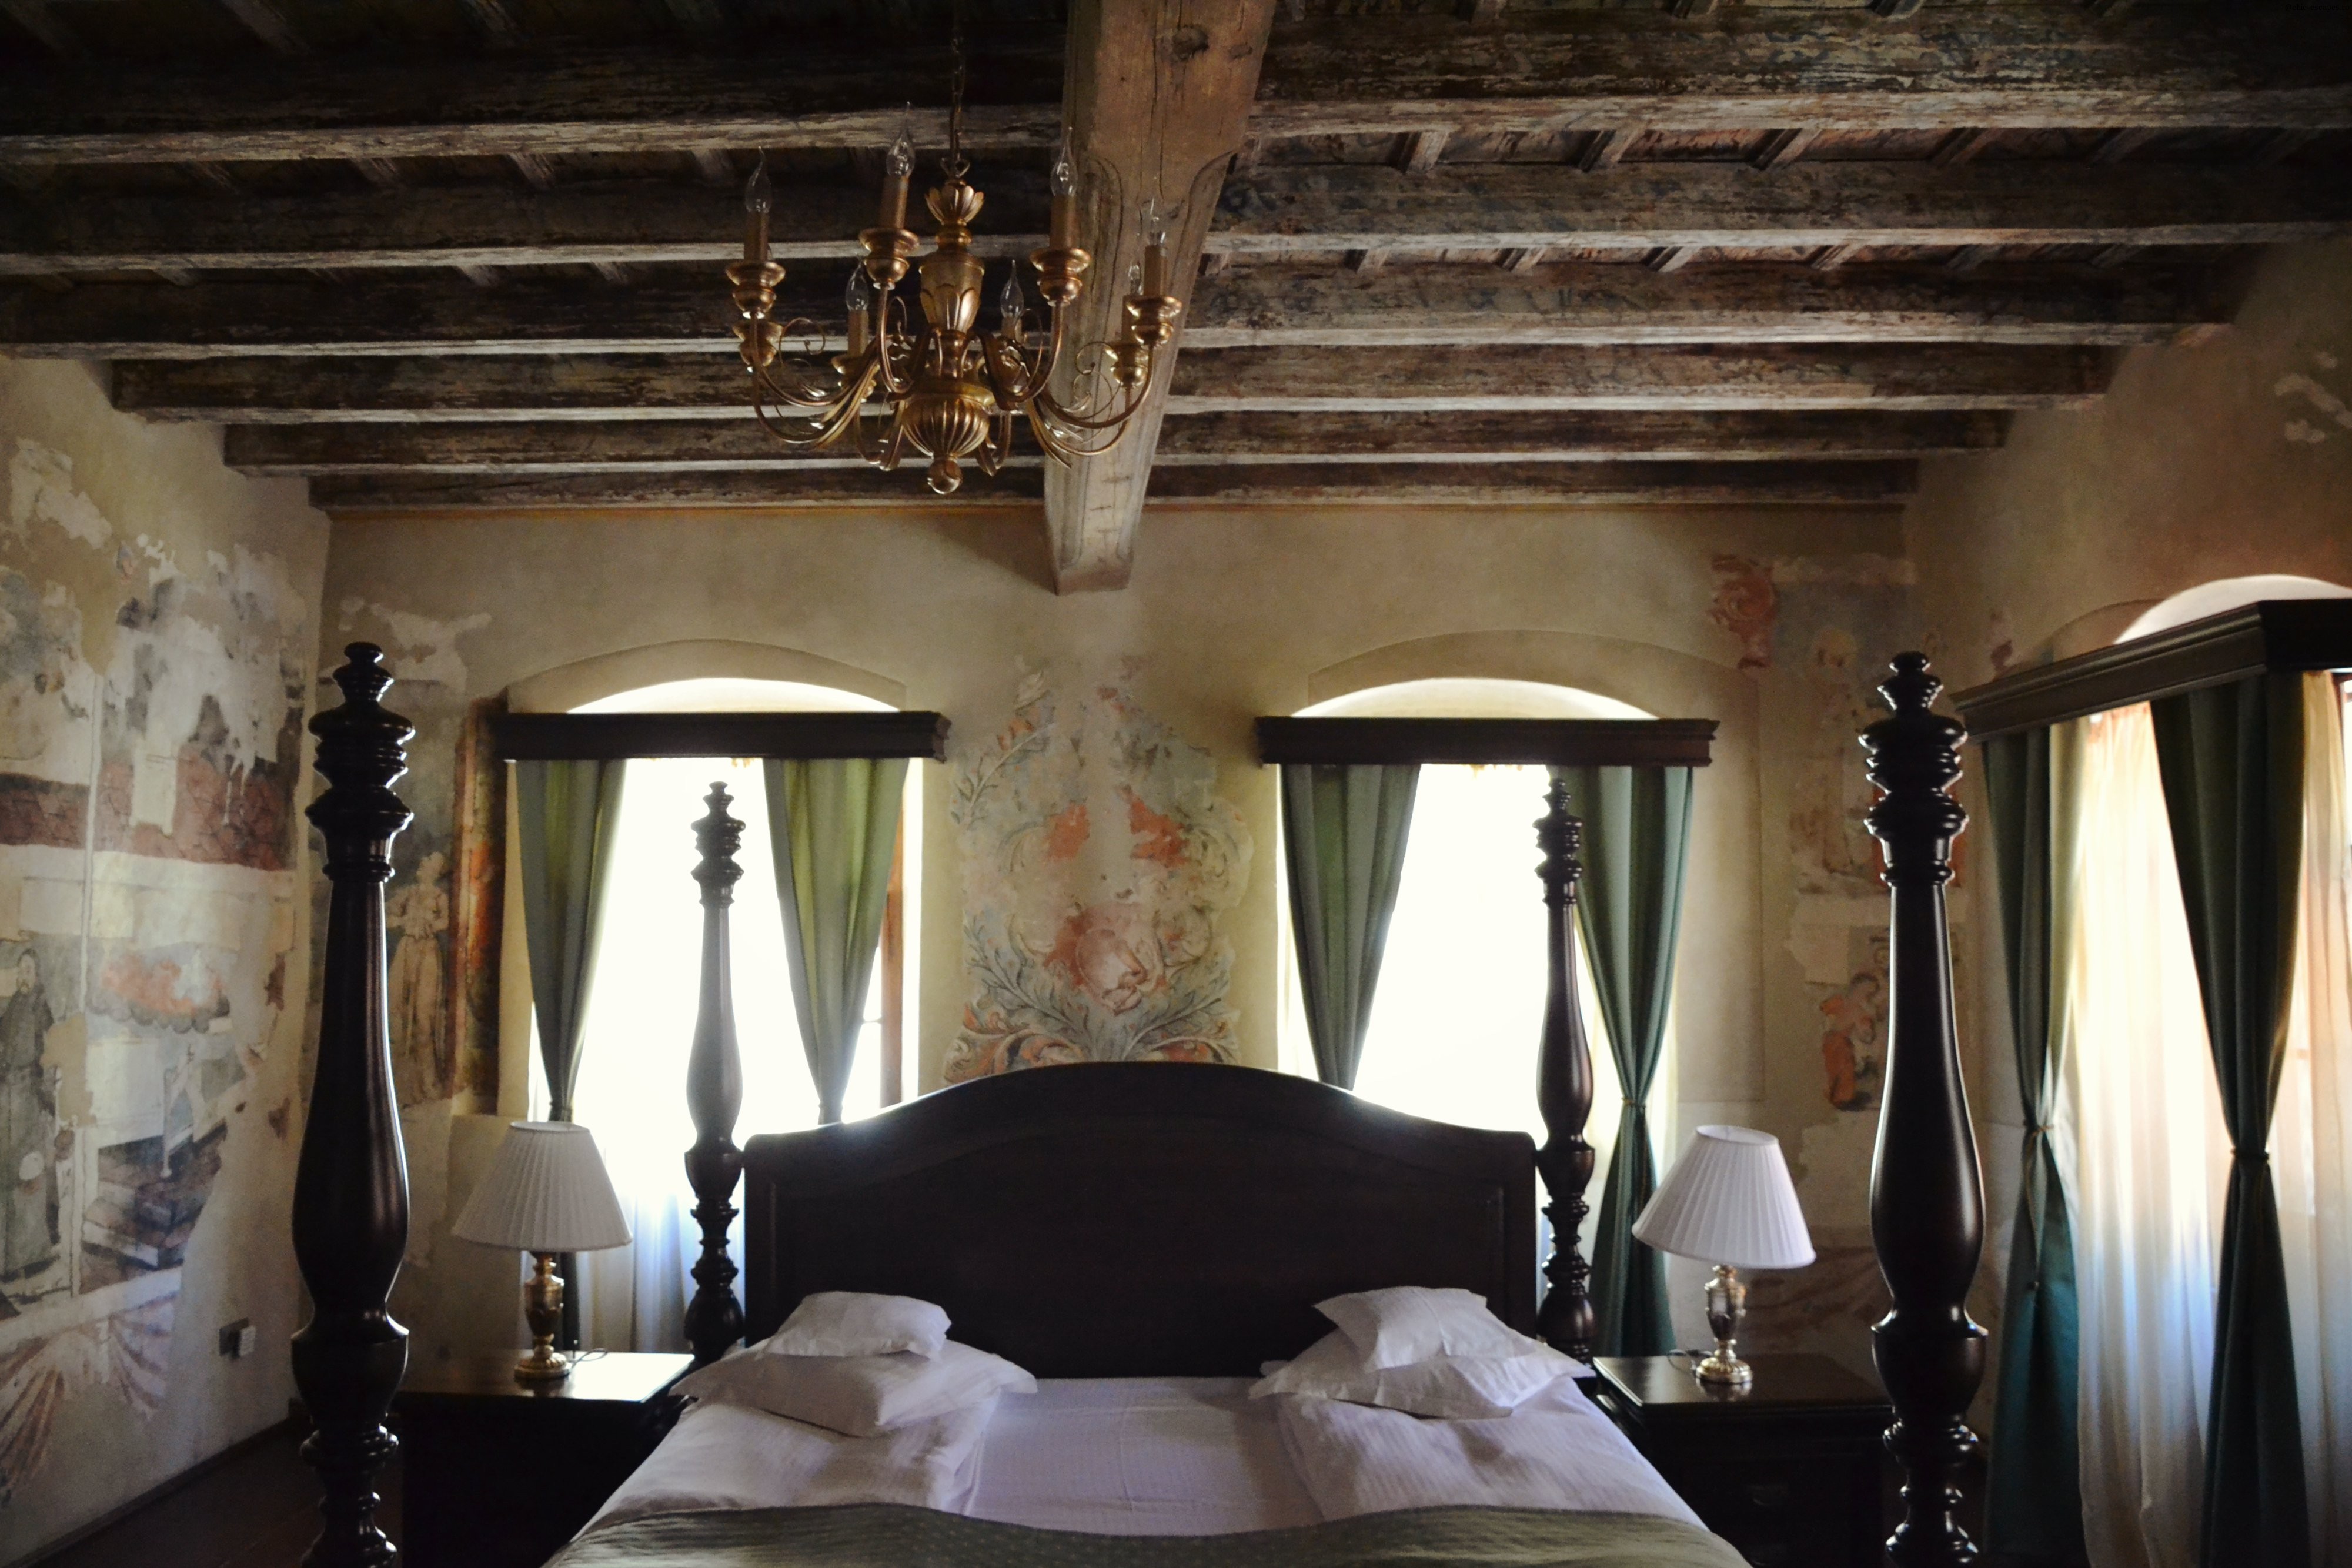 Room with original fresco, the only place in Europe where you can book accommodation in such a room. Book Krauss House.